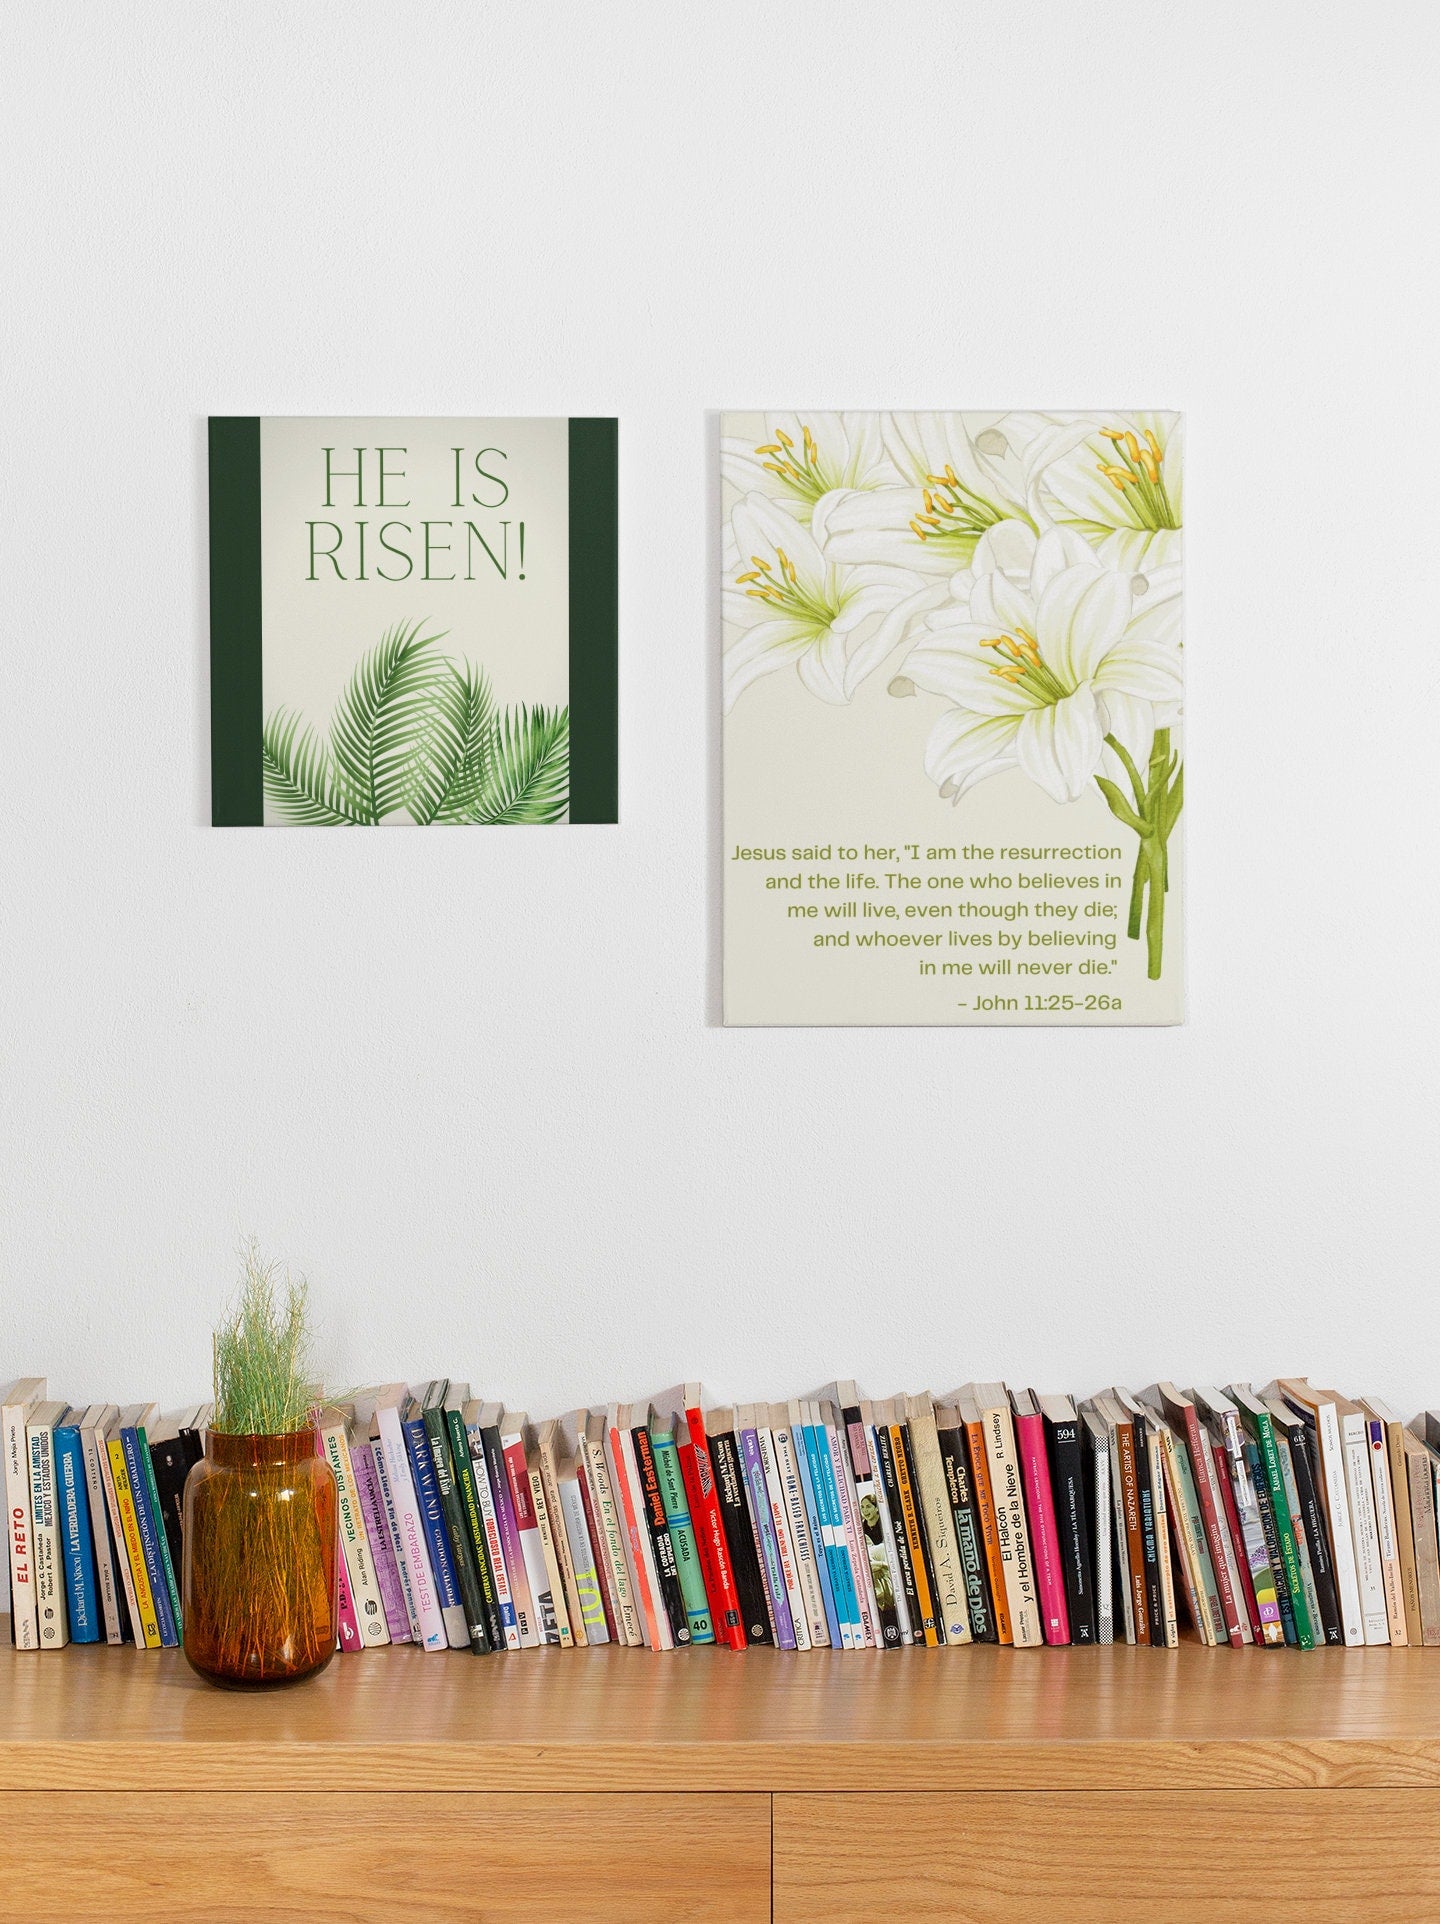 Easter Wall Decor Print - frame not included